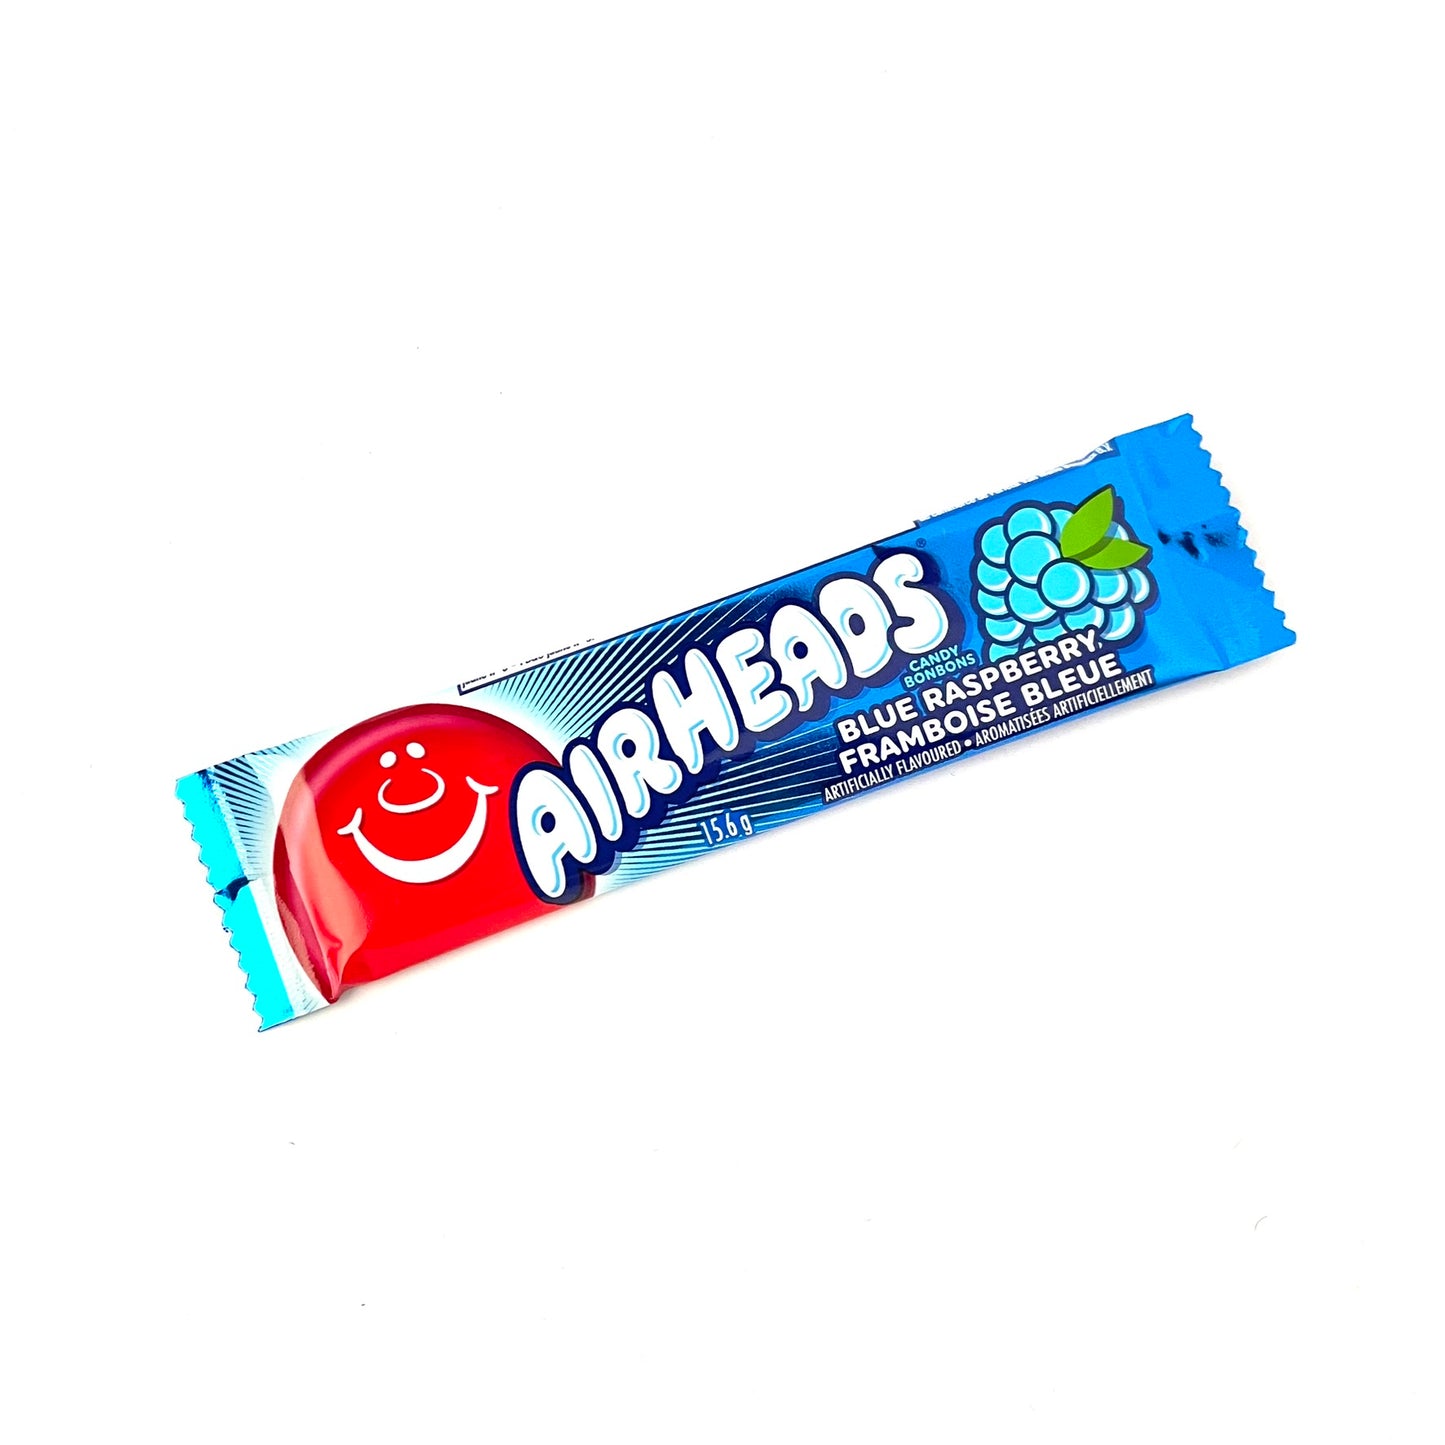 Airheads candy _Assorted Flavours